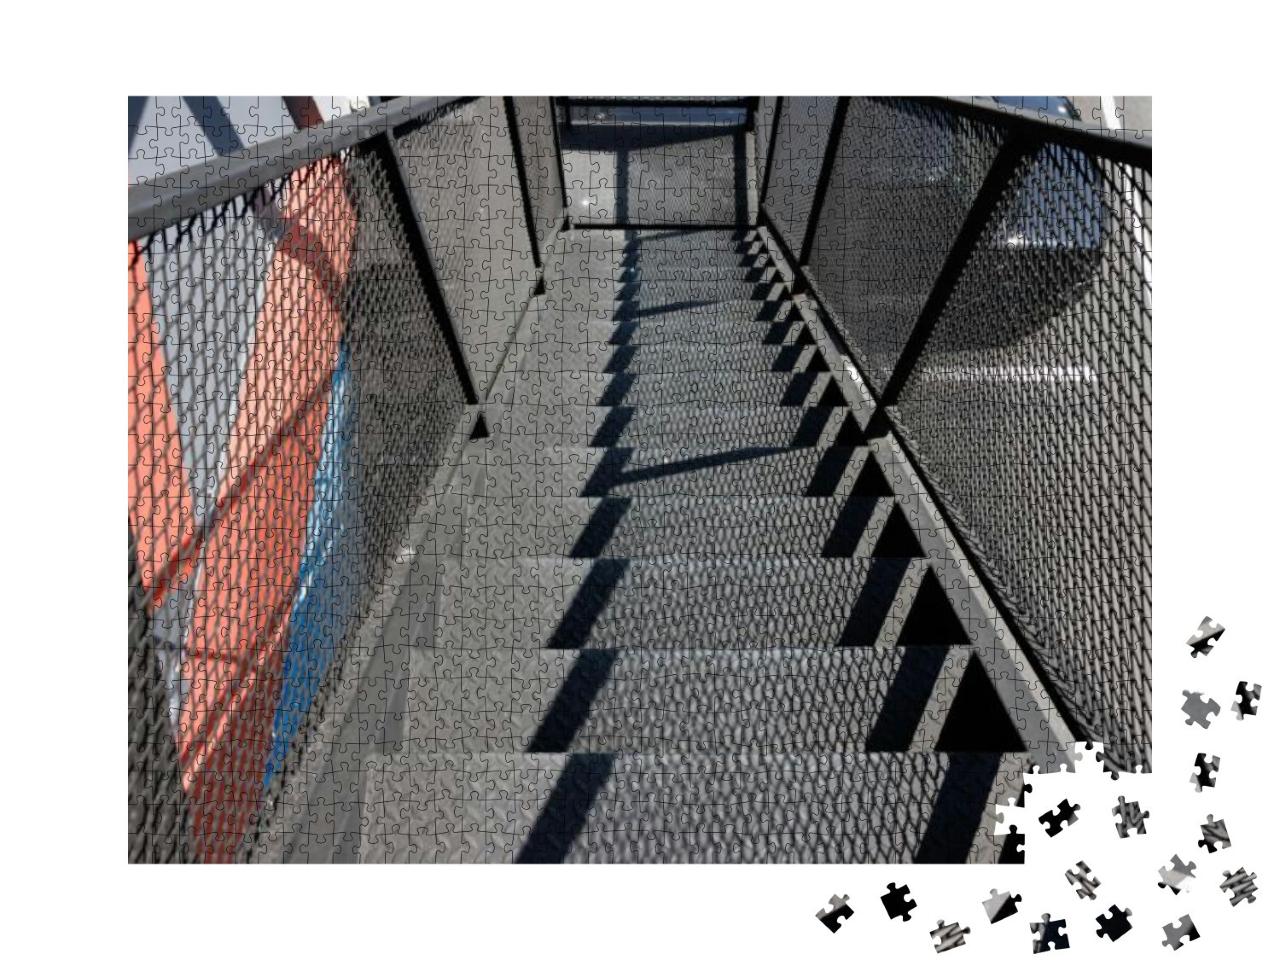 Outdoor Fire Escape Metal Stair. Light & Shadow on Steel... Jigsaw Puzzle with 1000 pieces